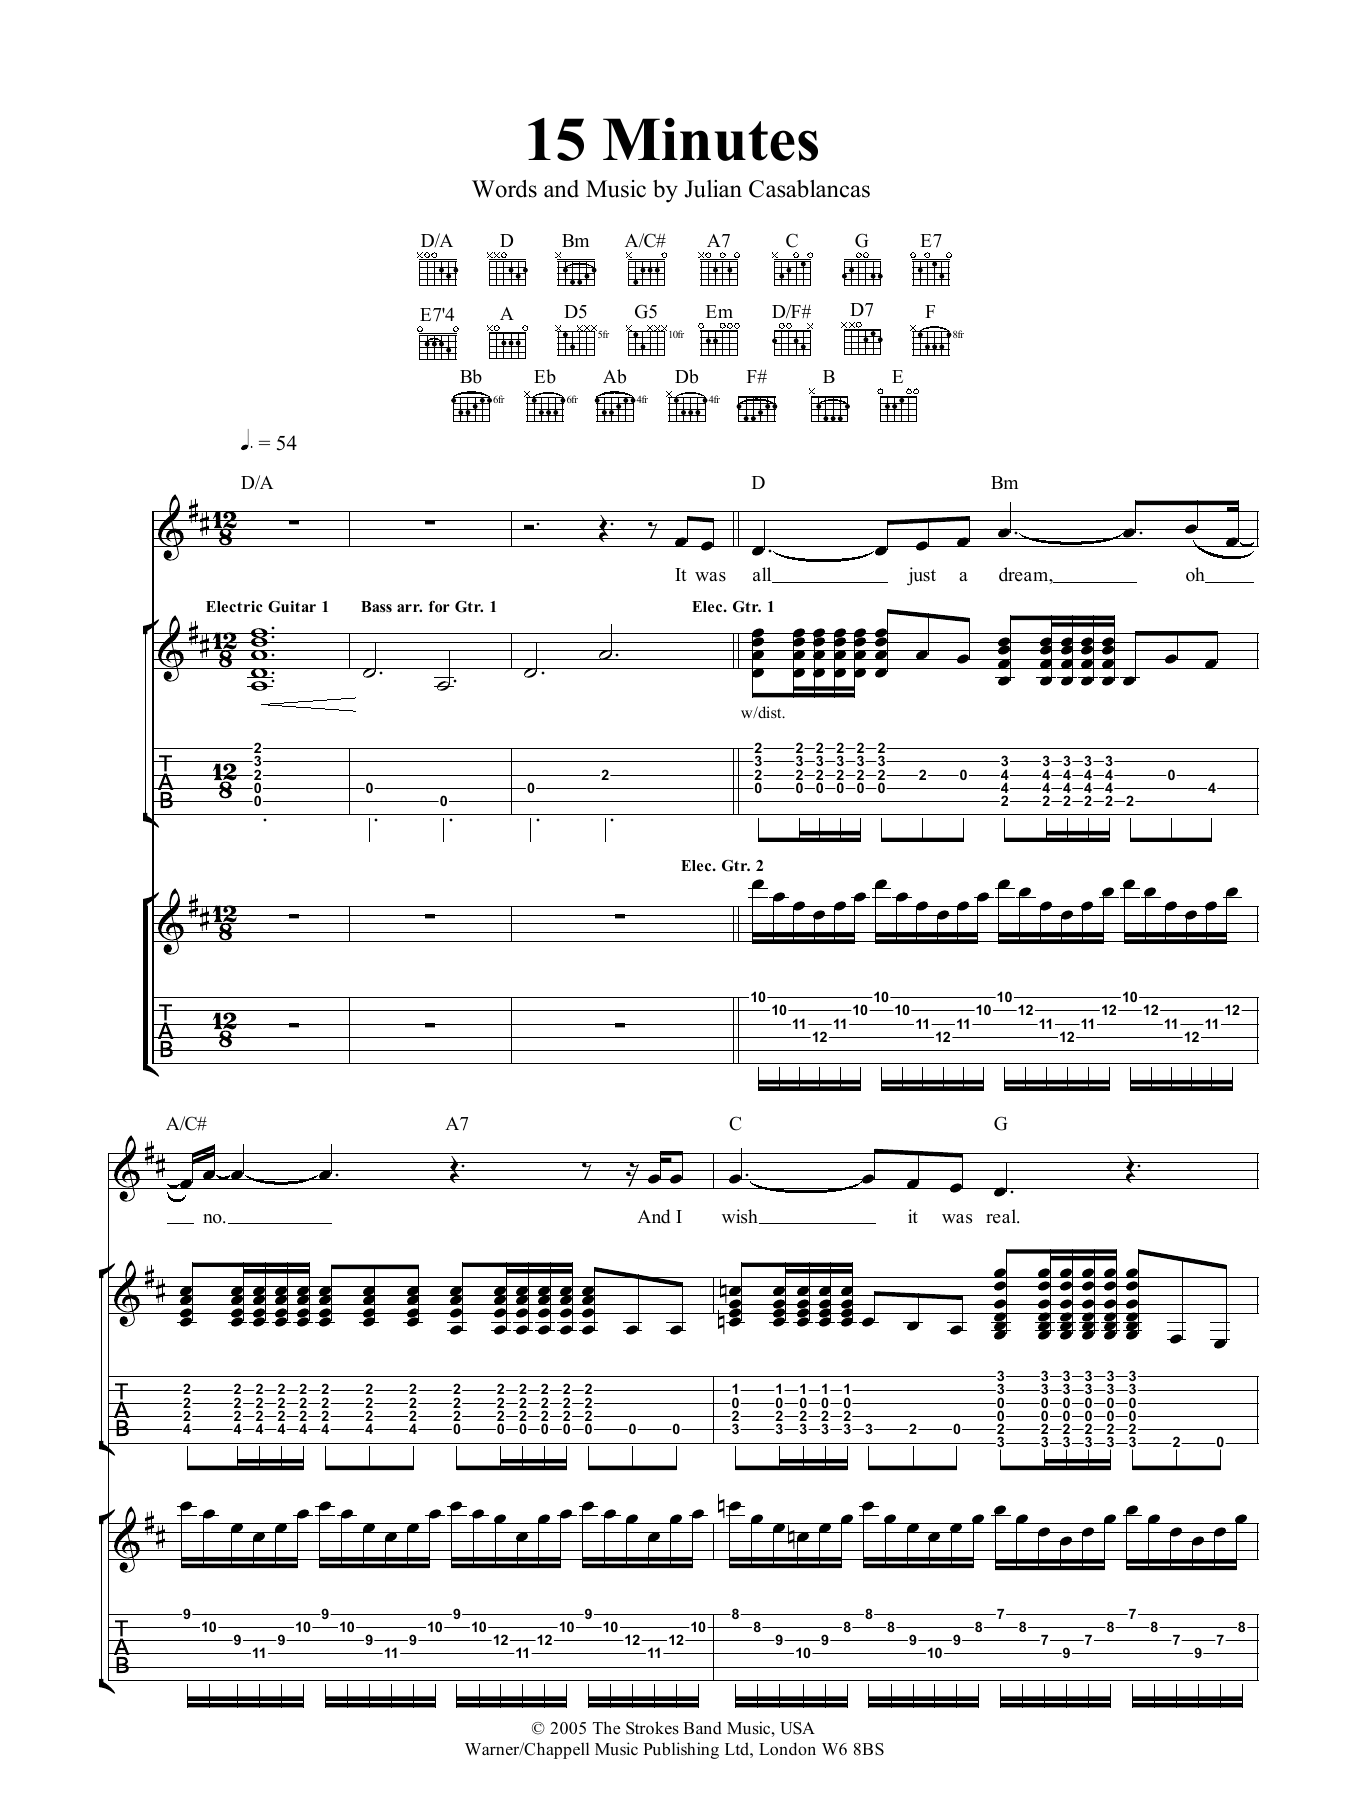 Download The Strokes 15 Minutes Sheet Music